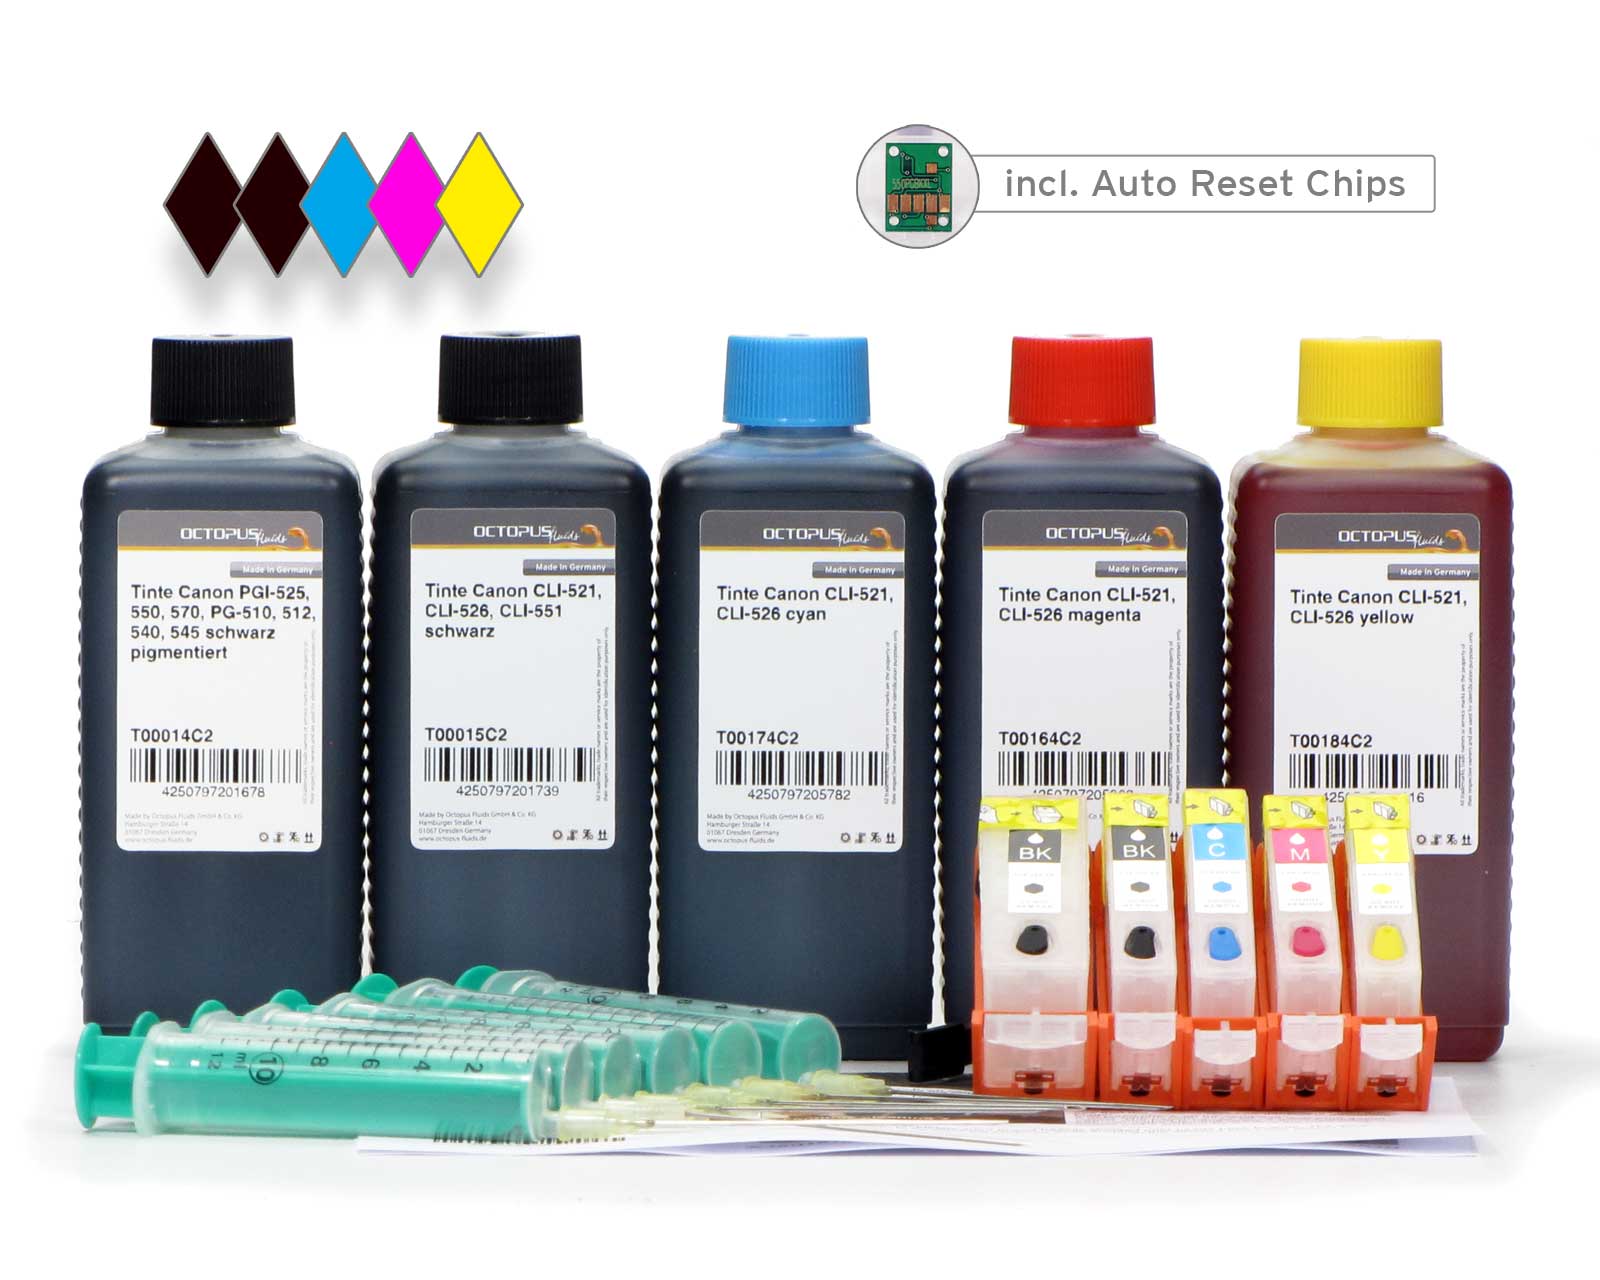 Refillable ink cartridges (kit) for Canon PGI-525, CLI 526 with Printer Ink